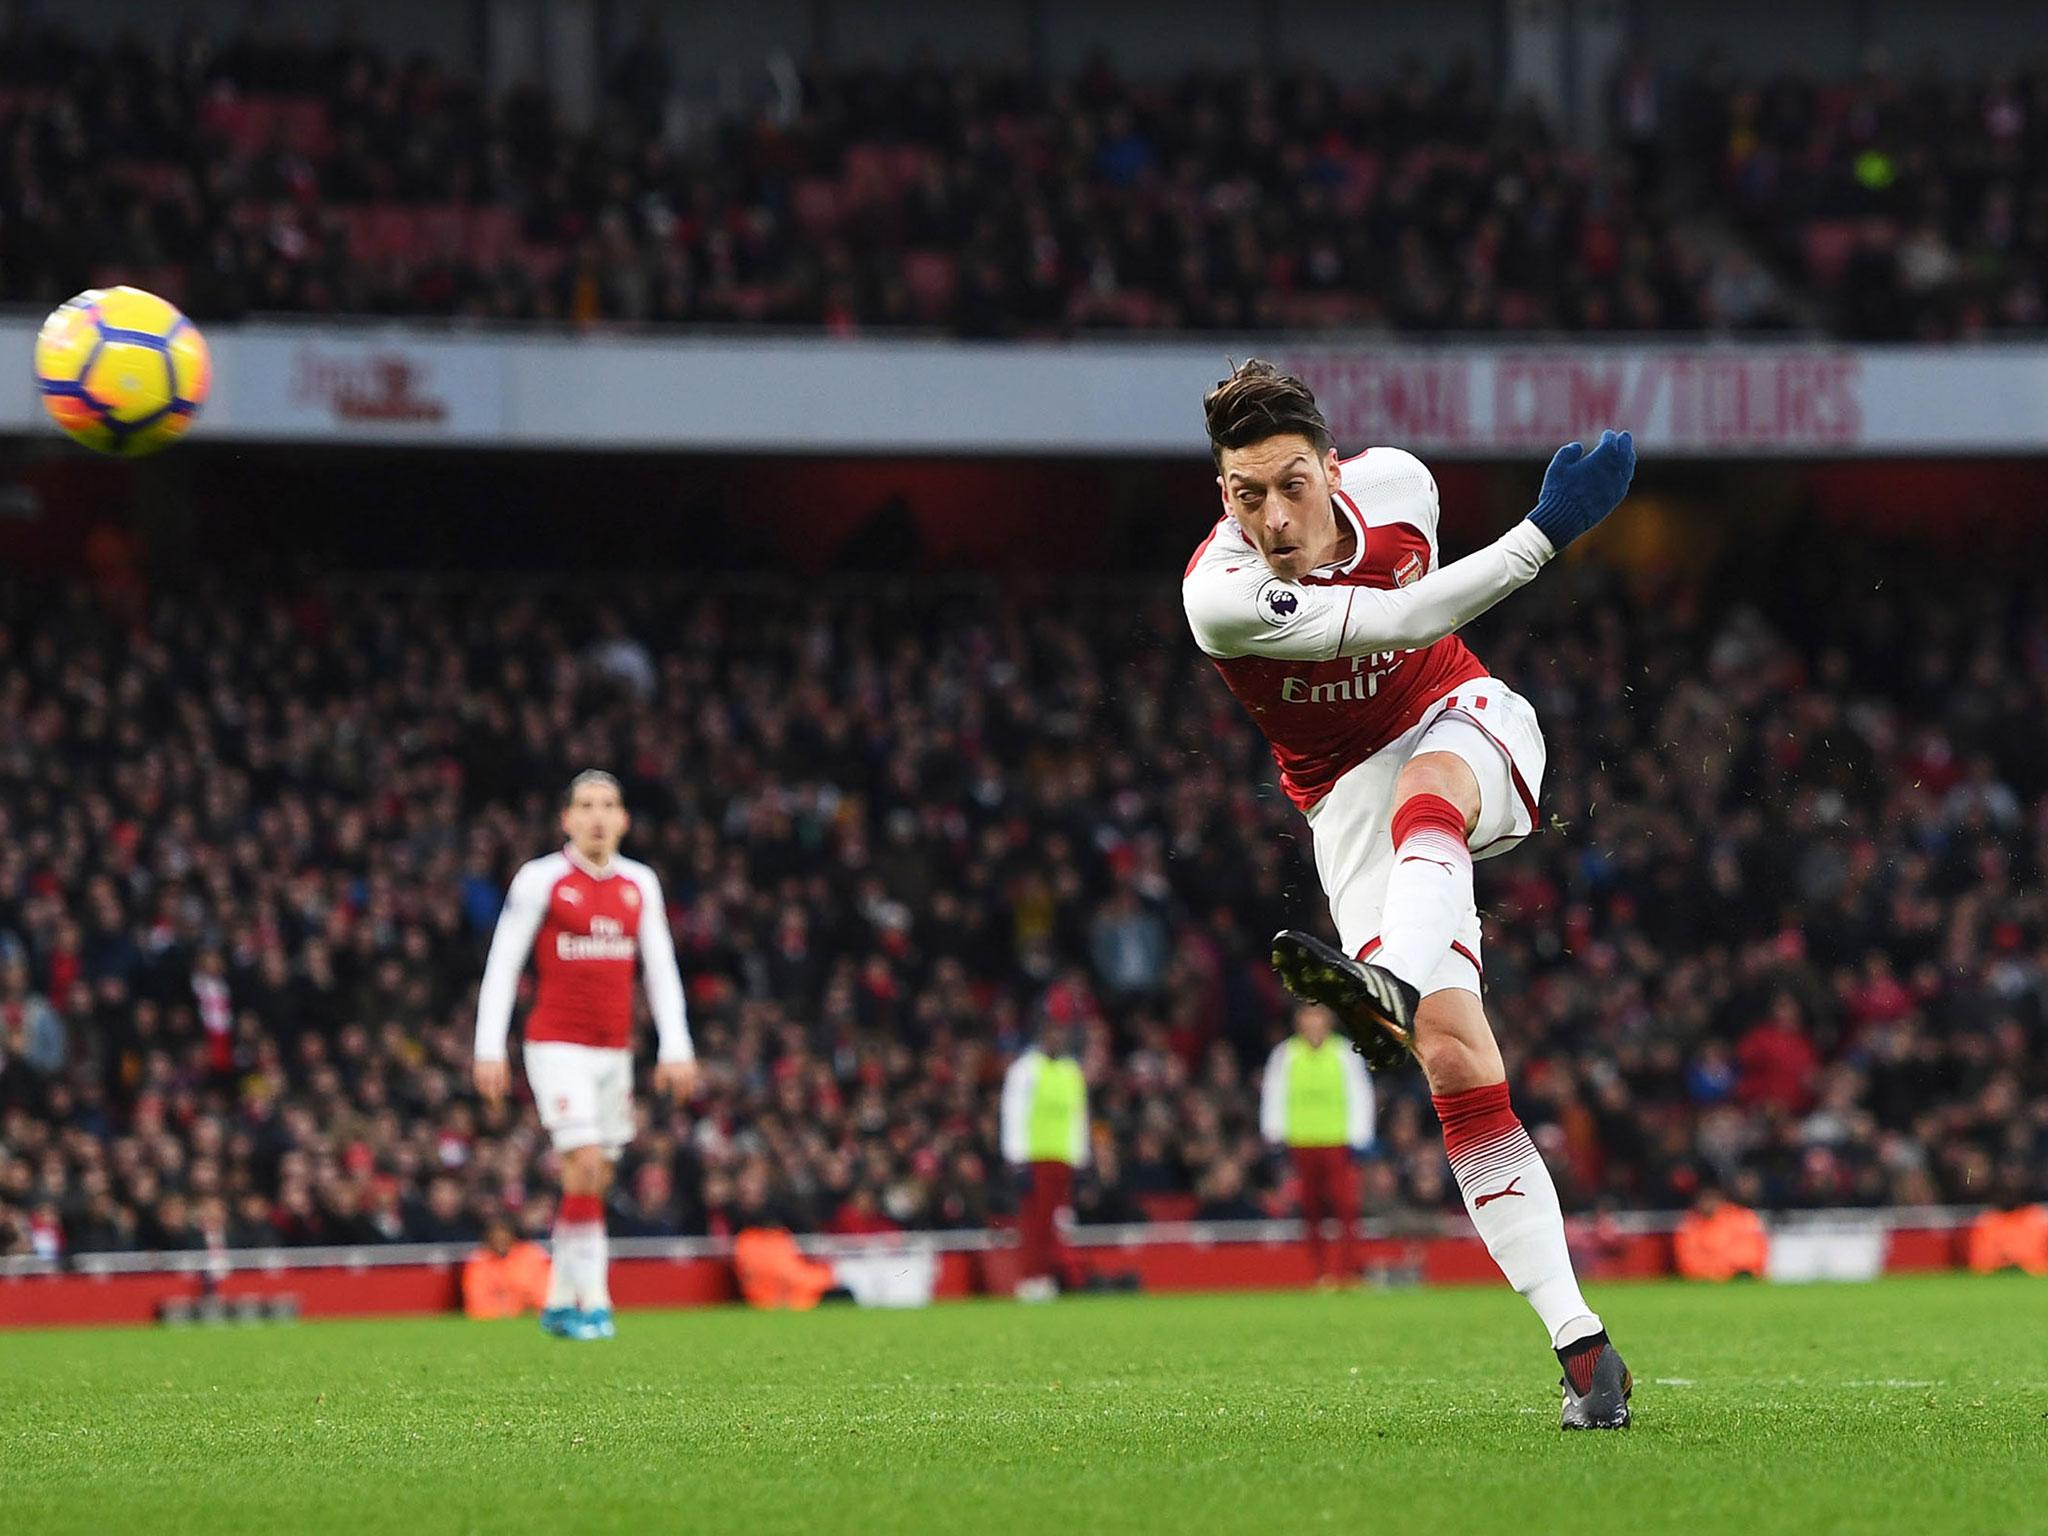 Mesut Ozil's volley secured Arsenal all three points